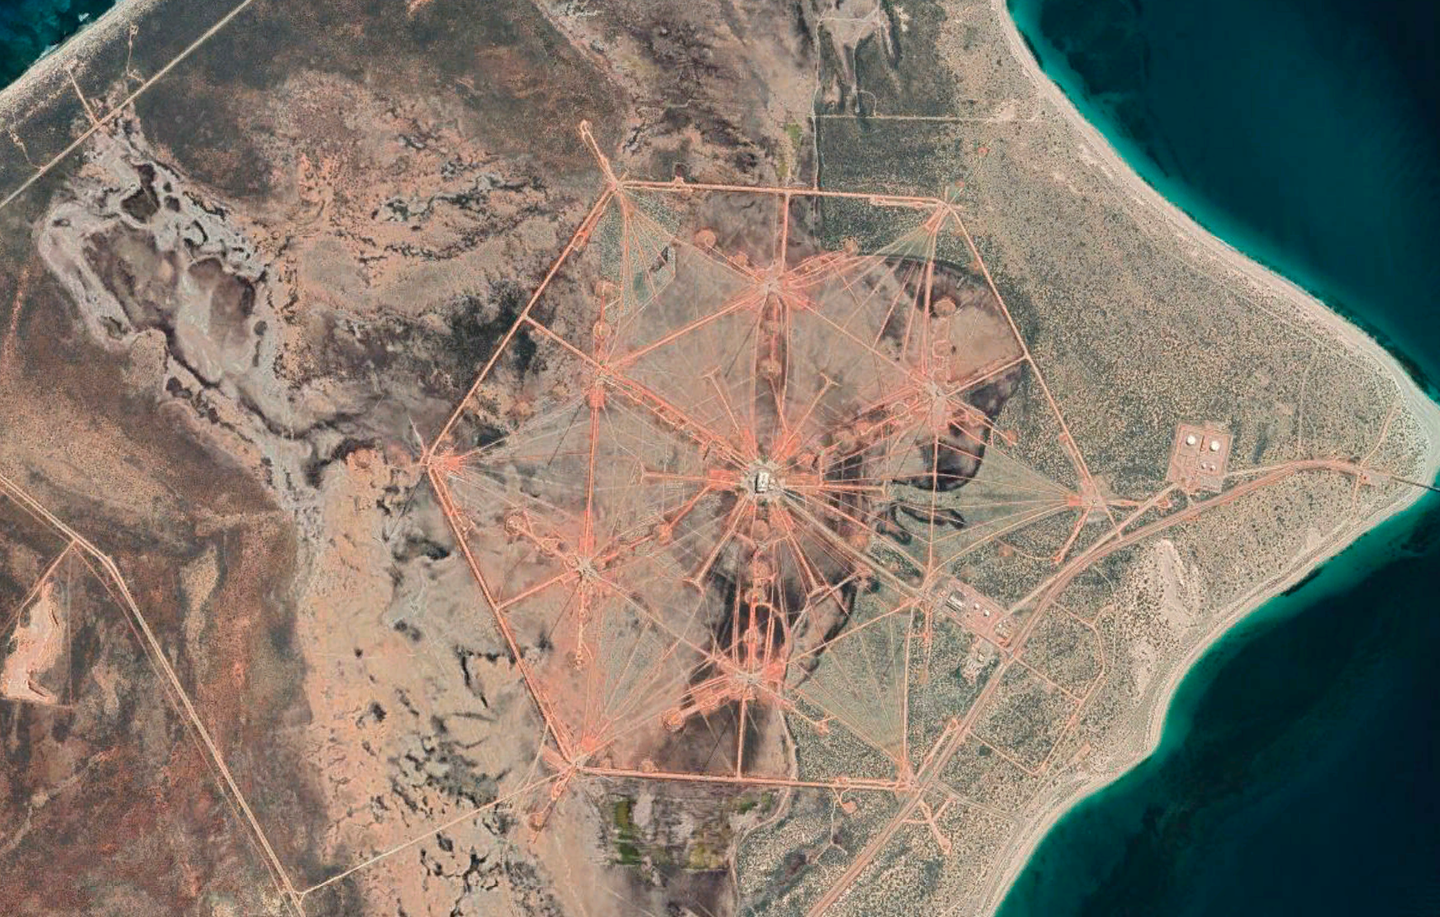 A satellite image of Naval Communication Station Harold E. Holt&nbsp;showing the prominent array of 13 radio towers used for VLF communications. <em>Google Earth</em>